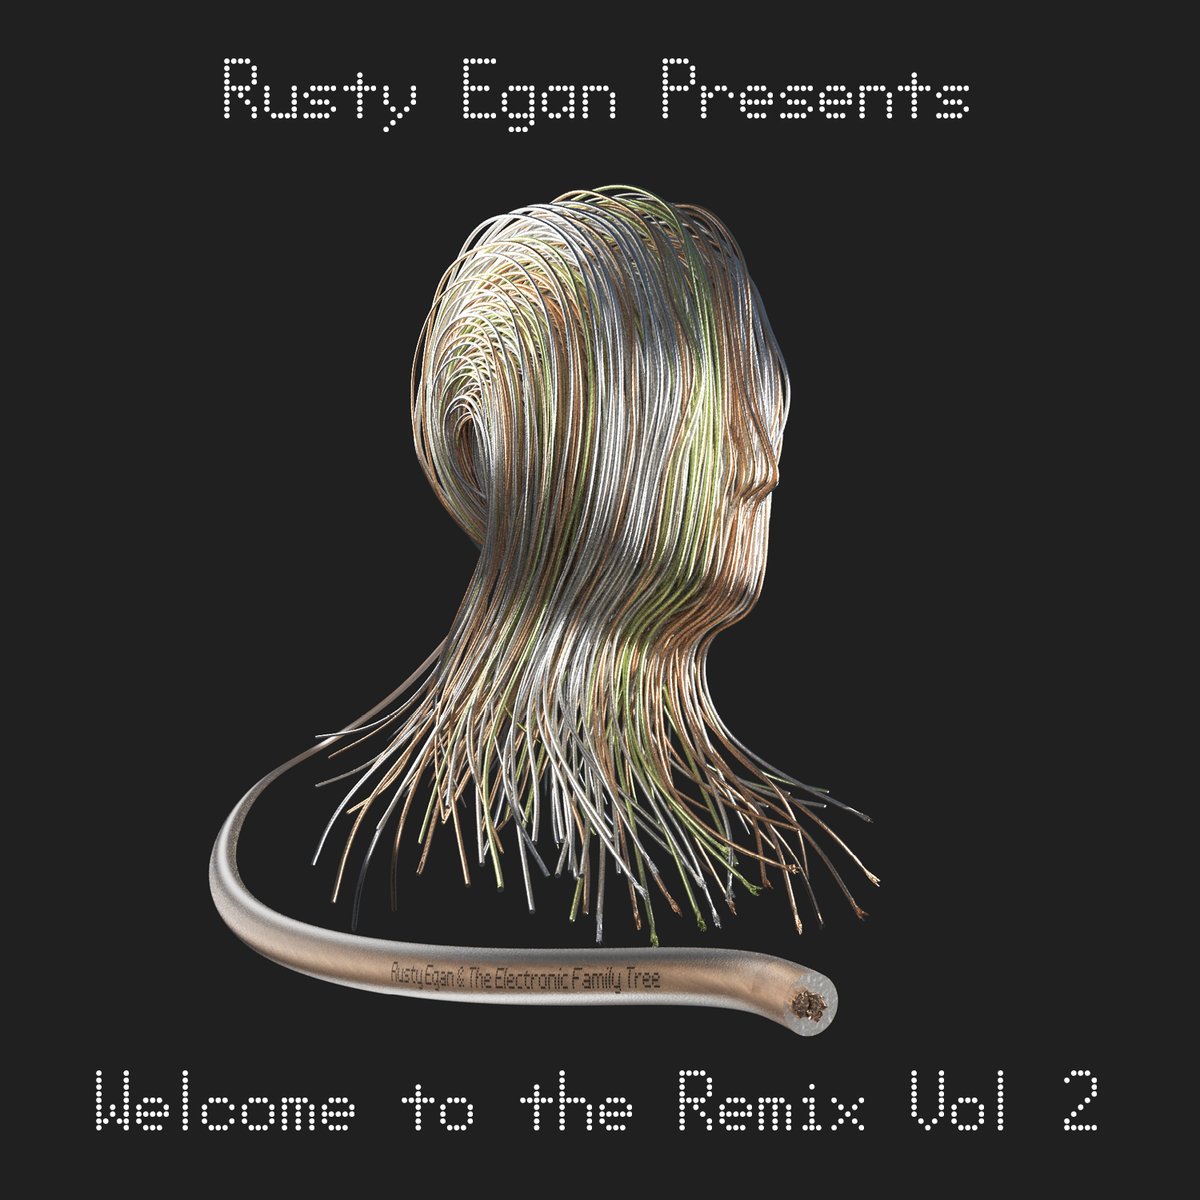 #WelcomeToTheRemixVol2 by @DJRustyEgan is out 4Oct19 hear the #REOE #Remix ...